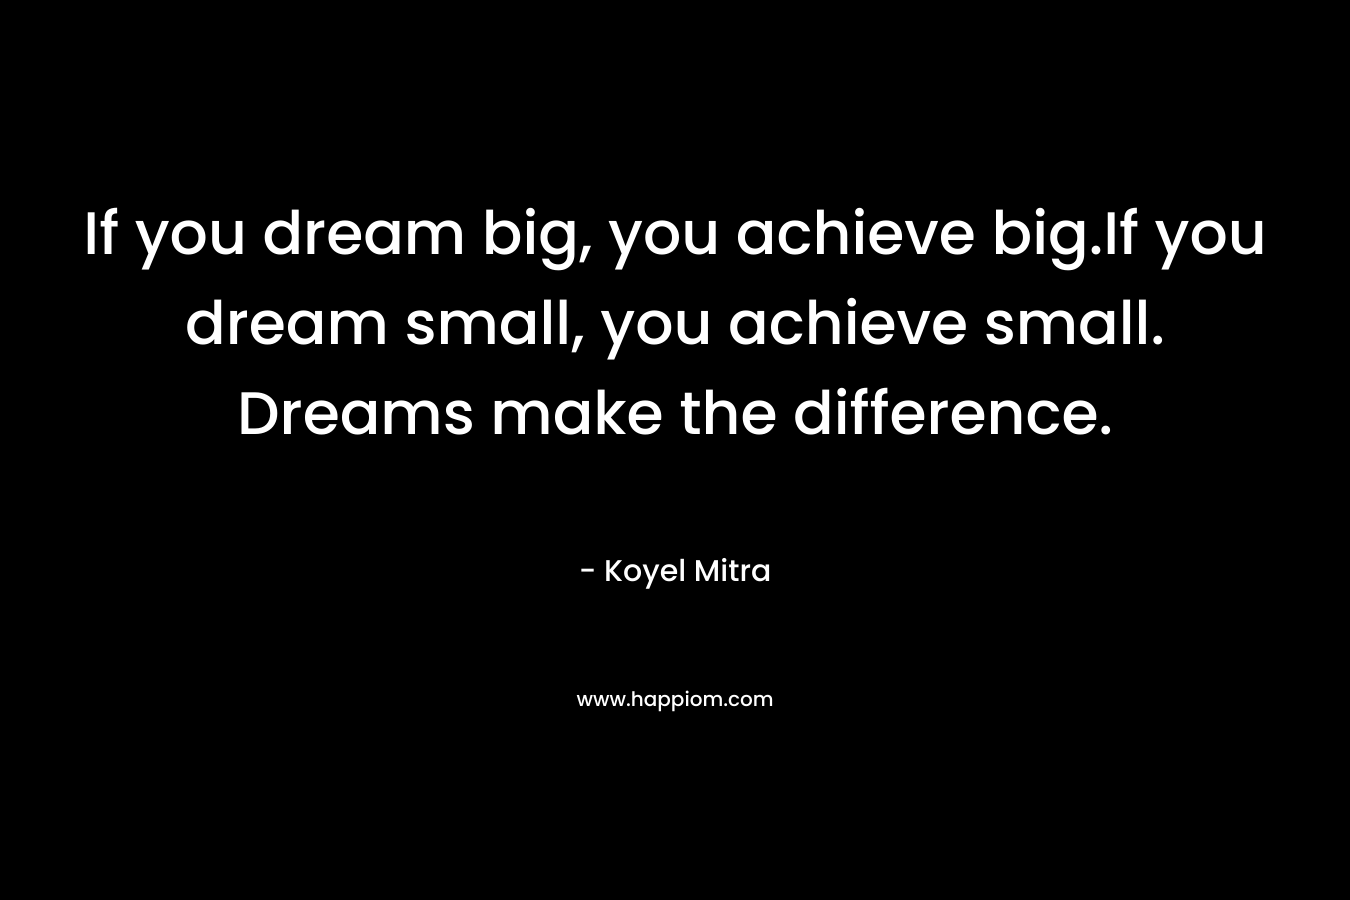 If you dream big, you achieve big.If you dream small, you achieve small. Dreams make the difference.